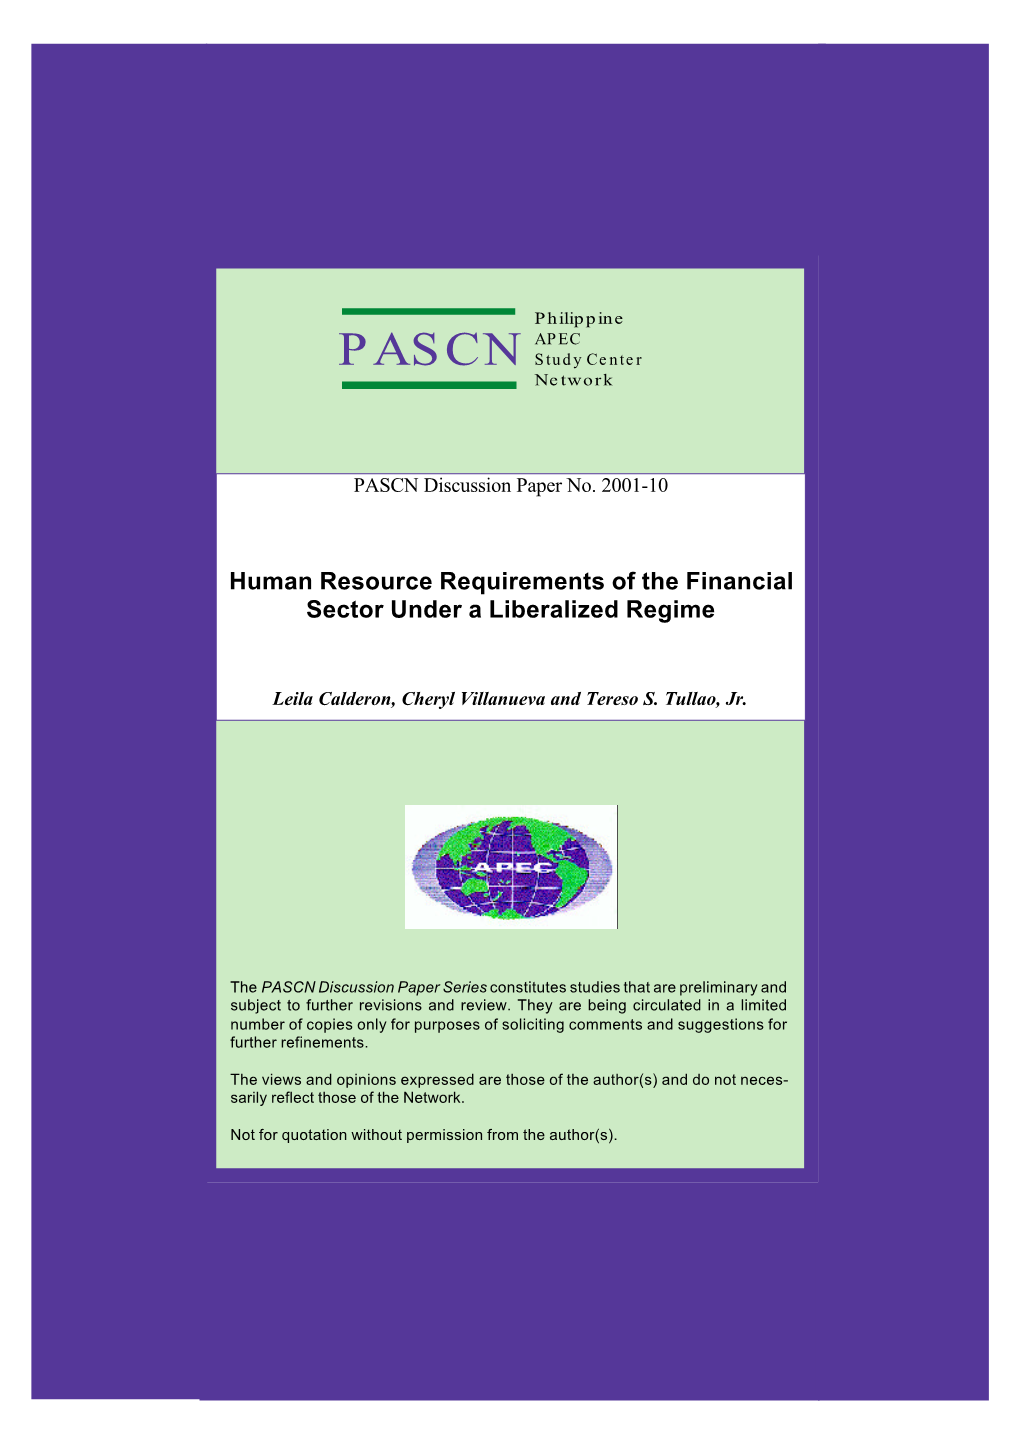 Human Resource Requirements of the Financial Sector Under a Liberalized Regime